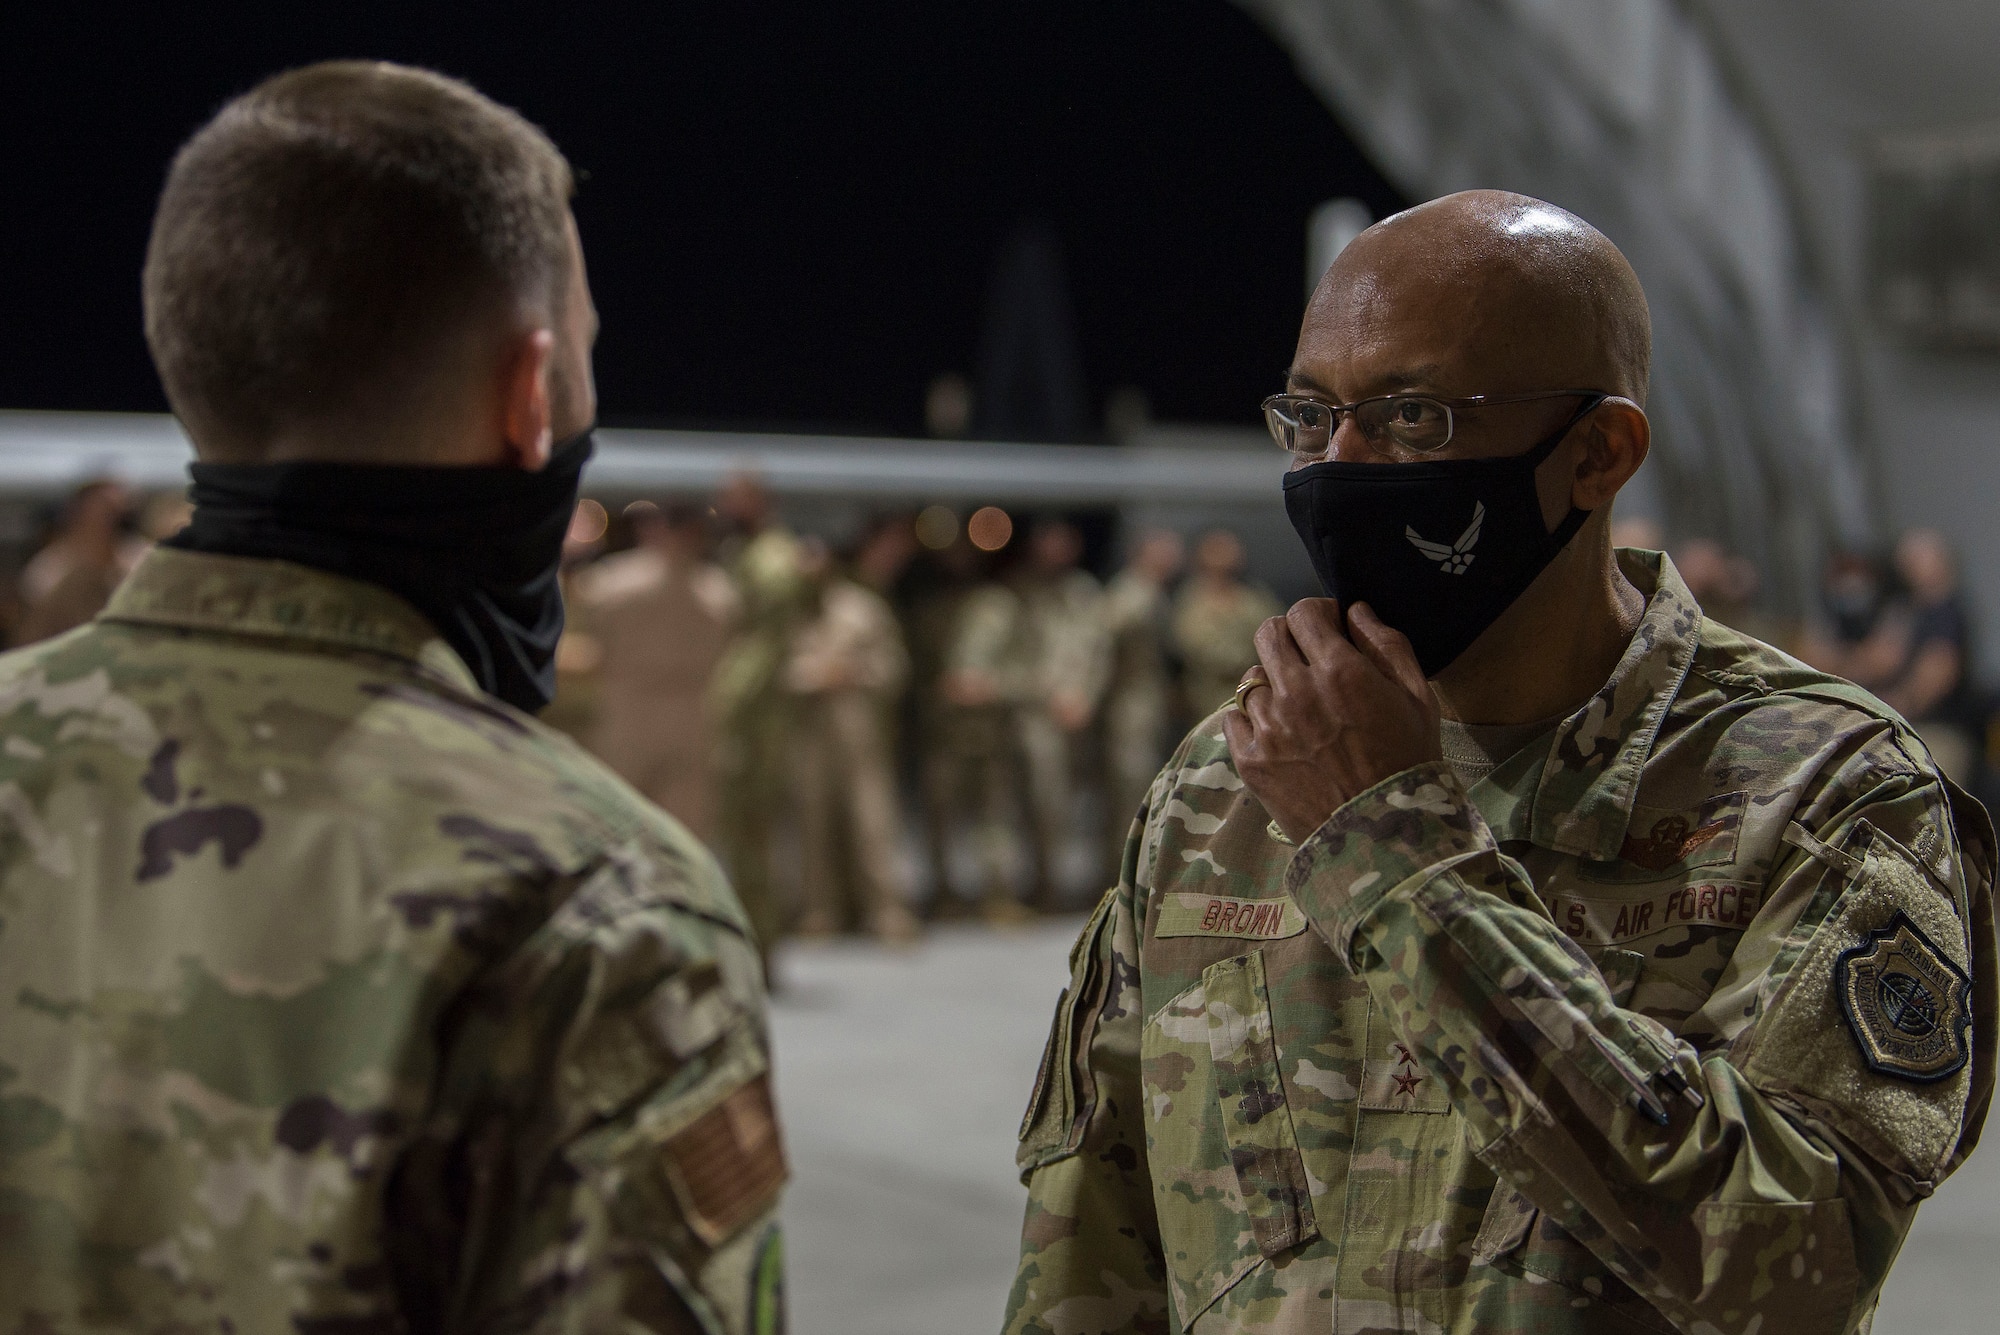 Chief of Staff of the Air Force Gen. Charles Q. Brown, Jr. speaks with an Airman assigned to the 380th Air Expeditionary Wing during a visit to Al Dhafra Air Base, United Arab Emirates, Dec. 21, 2020.